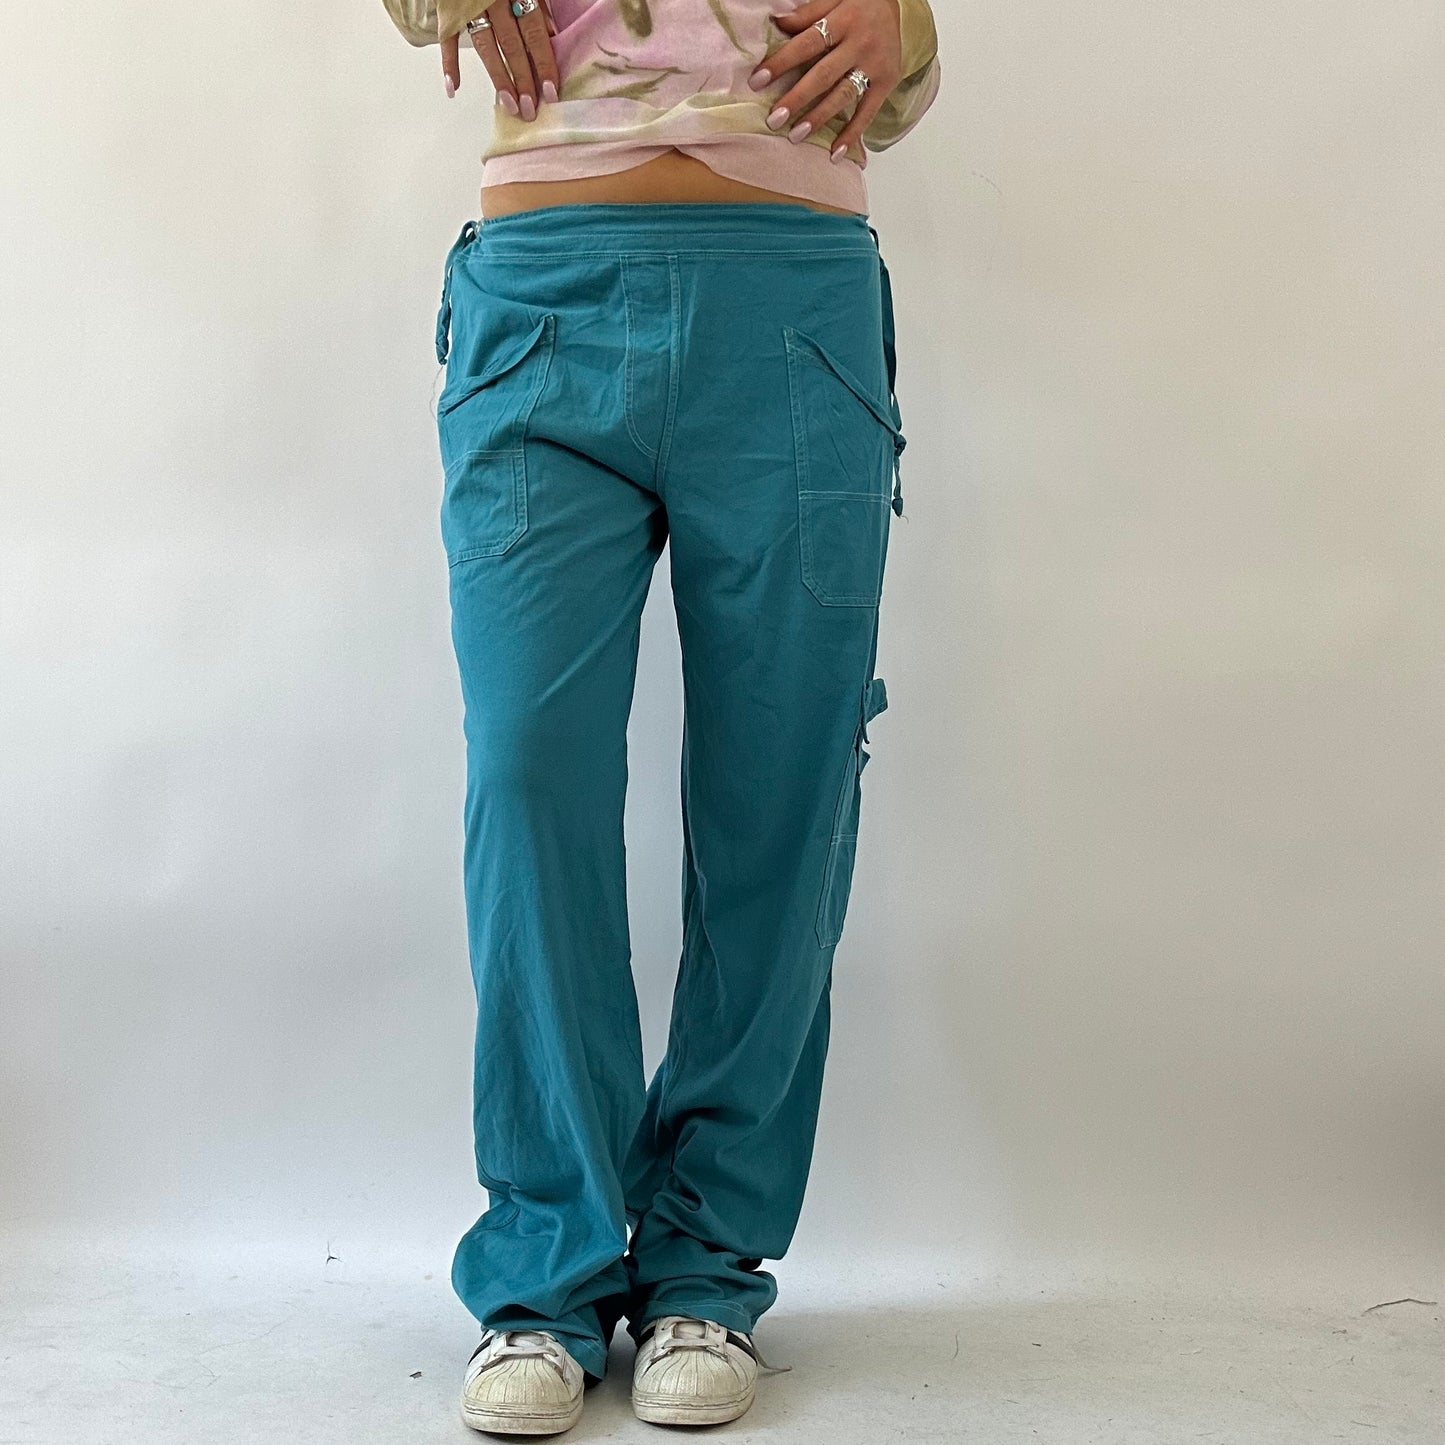 BOHO GIRL DROP | medium blue cargo trousers with pocket details and contrast stitch